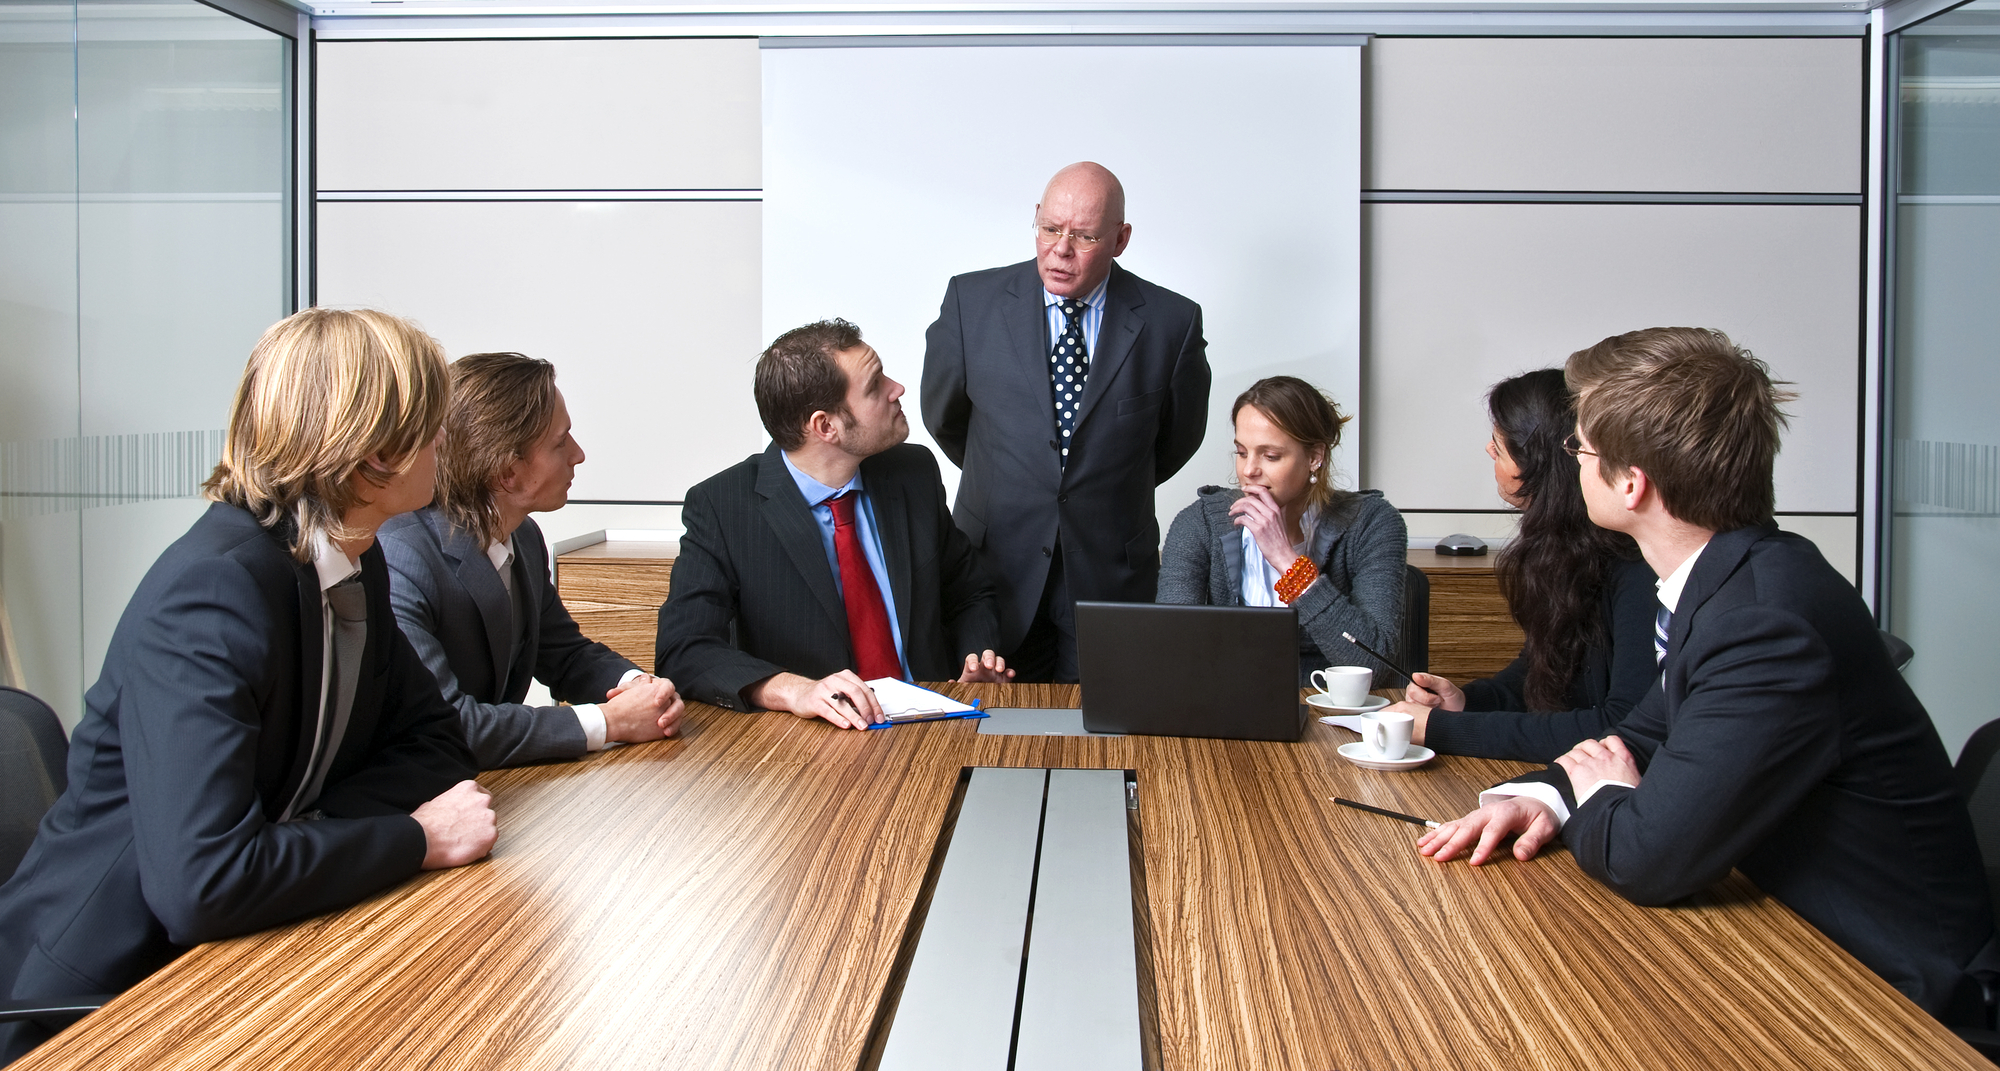 A company manager, and his team, discussing business strategies during an office meeting